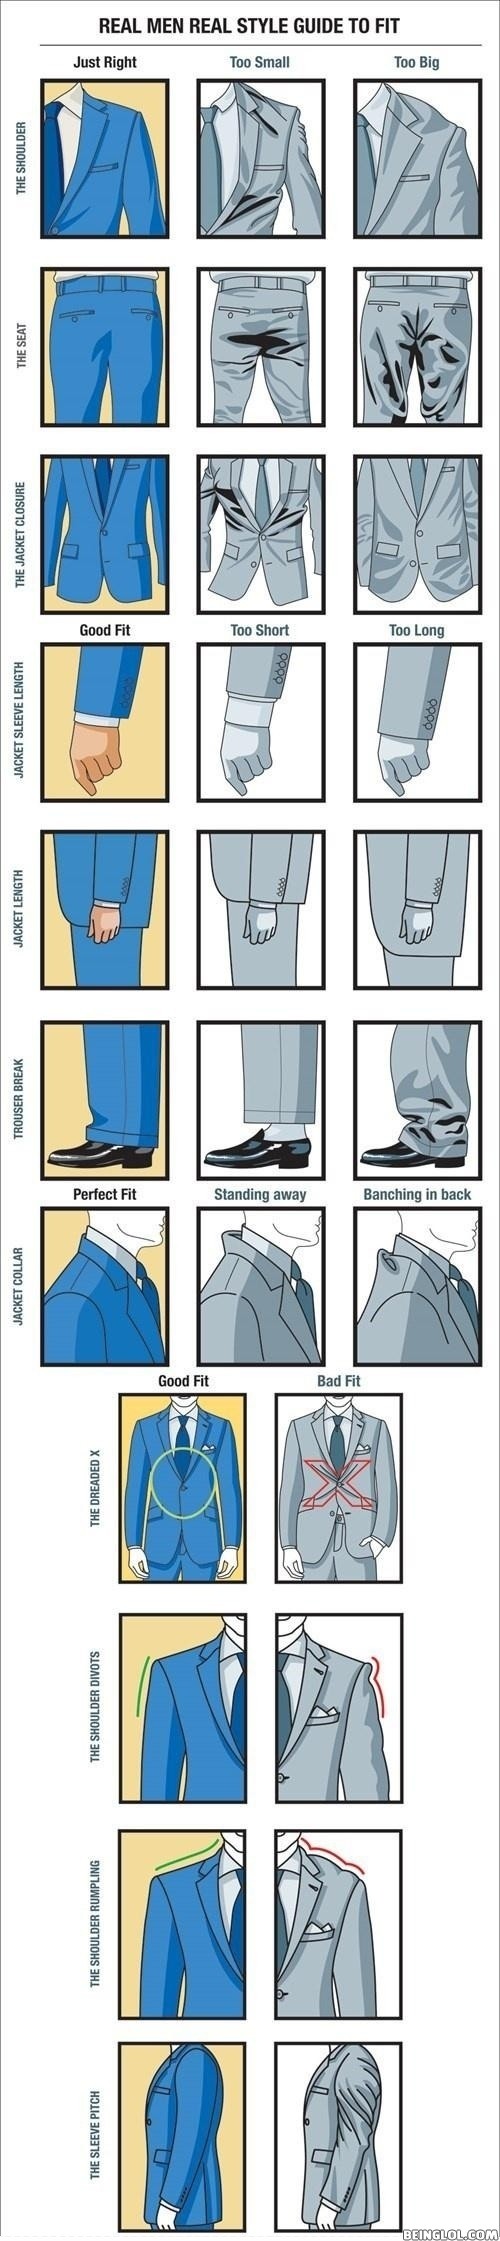 Real Men Real Style Guide to Fit